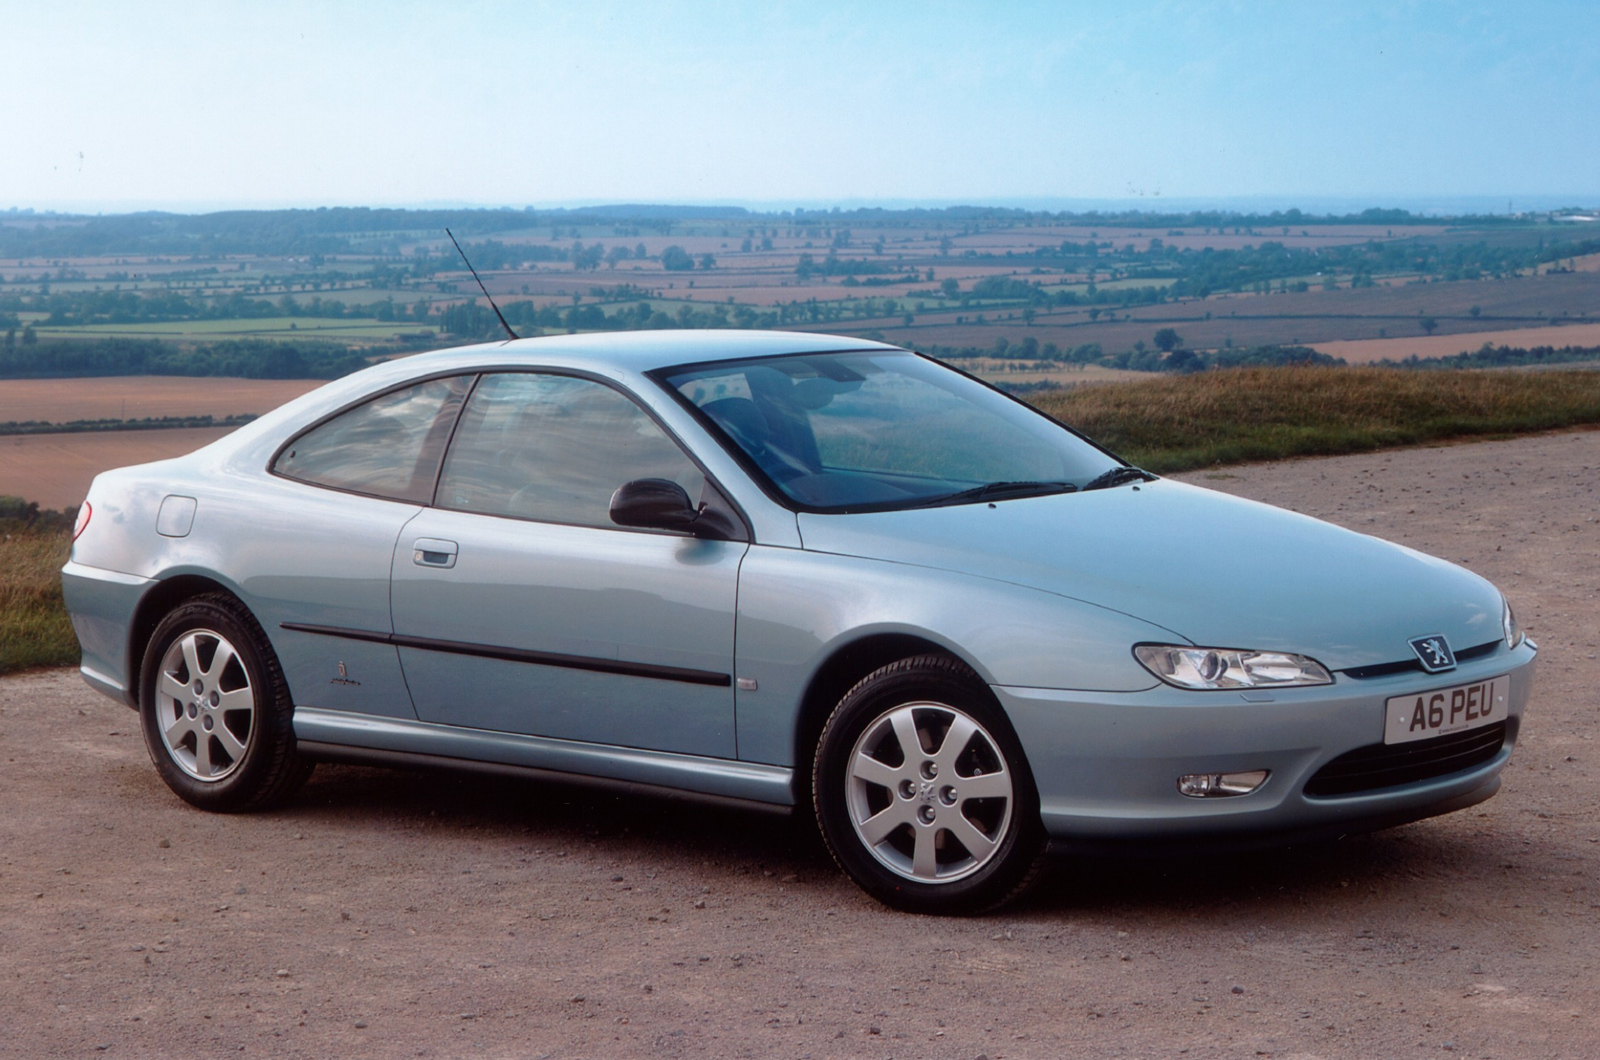 Was the Peugeot 406 coupe really a rejected Ferrari design Autocar